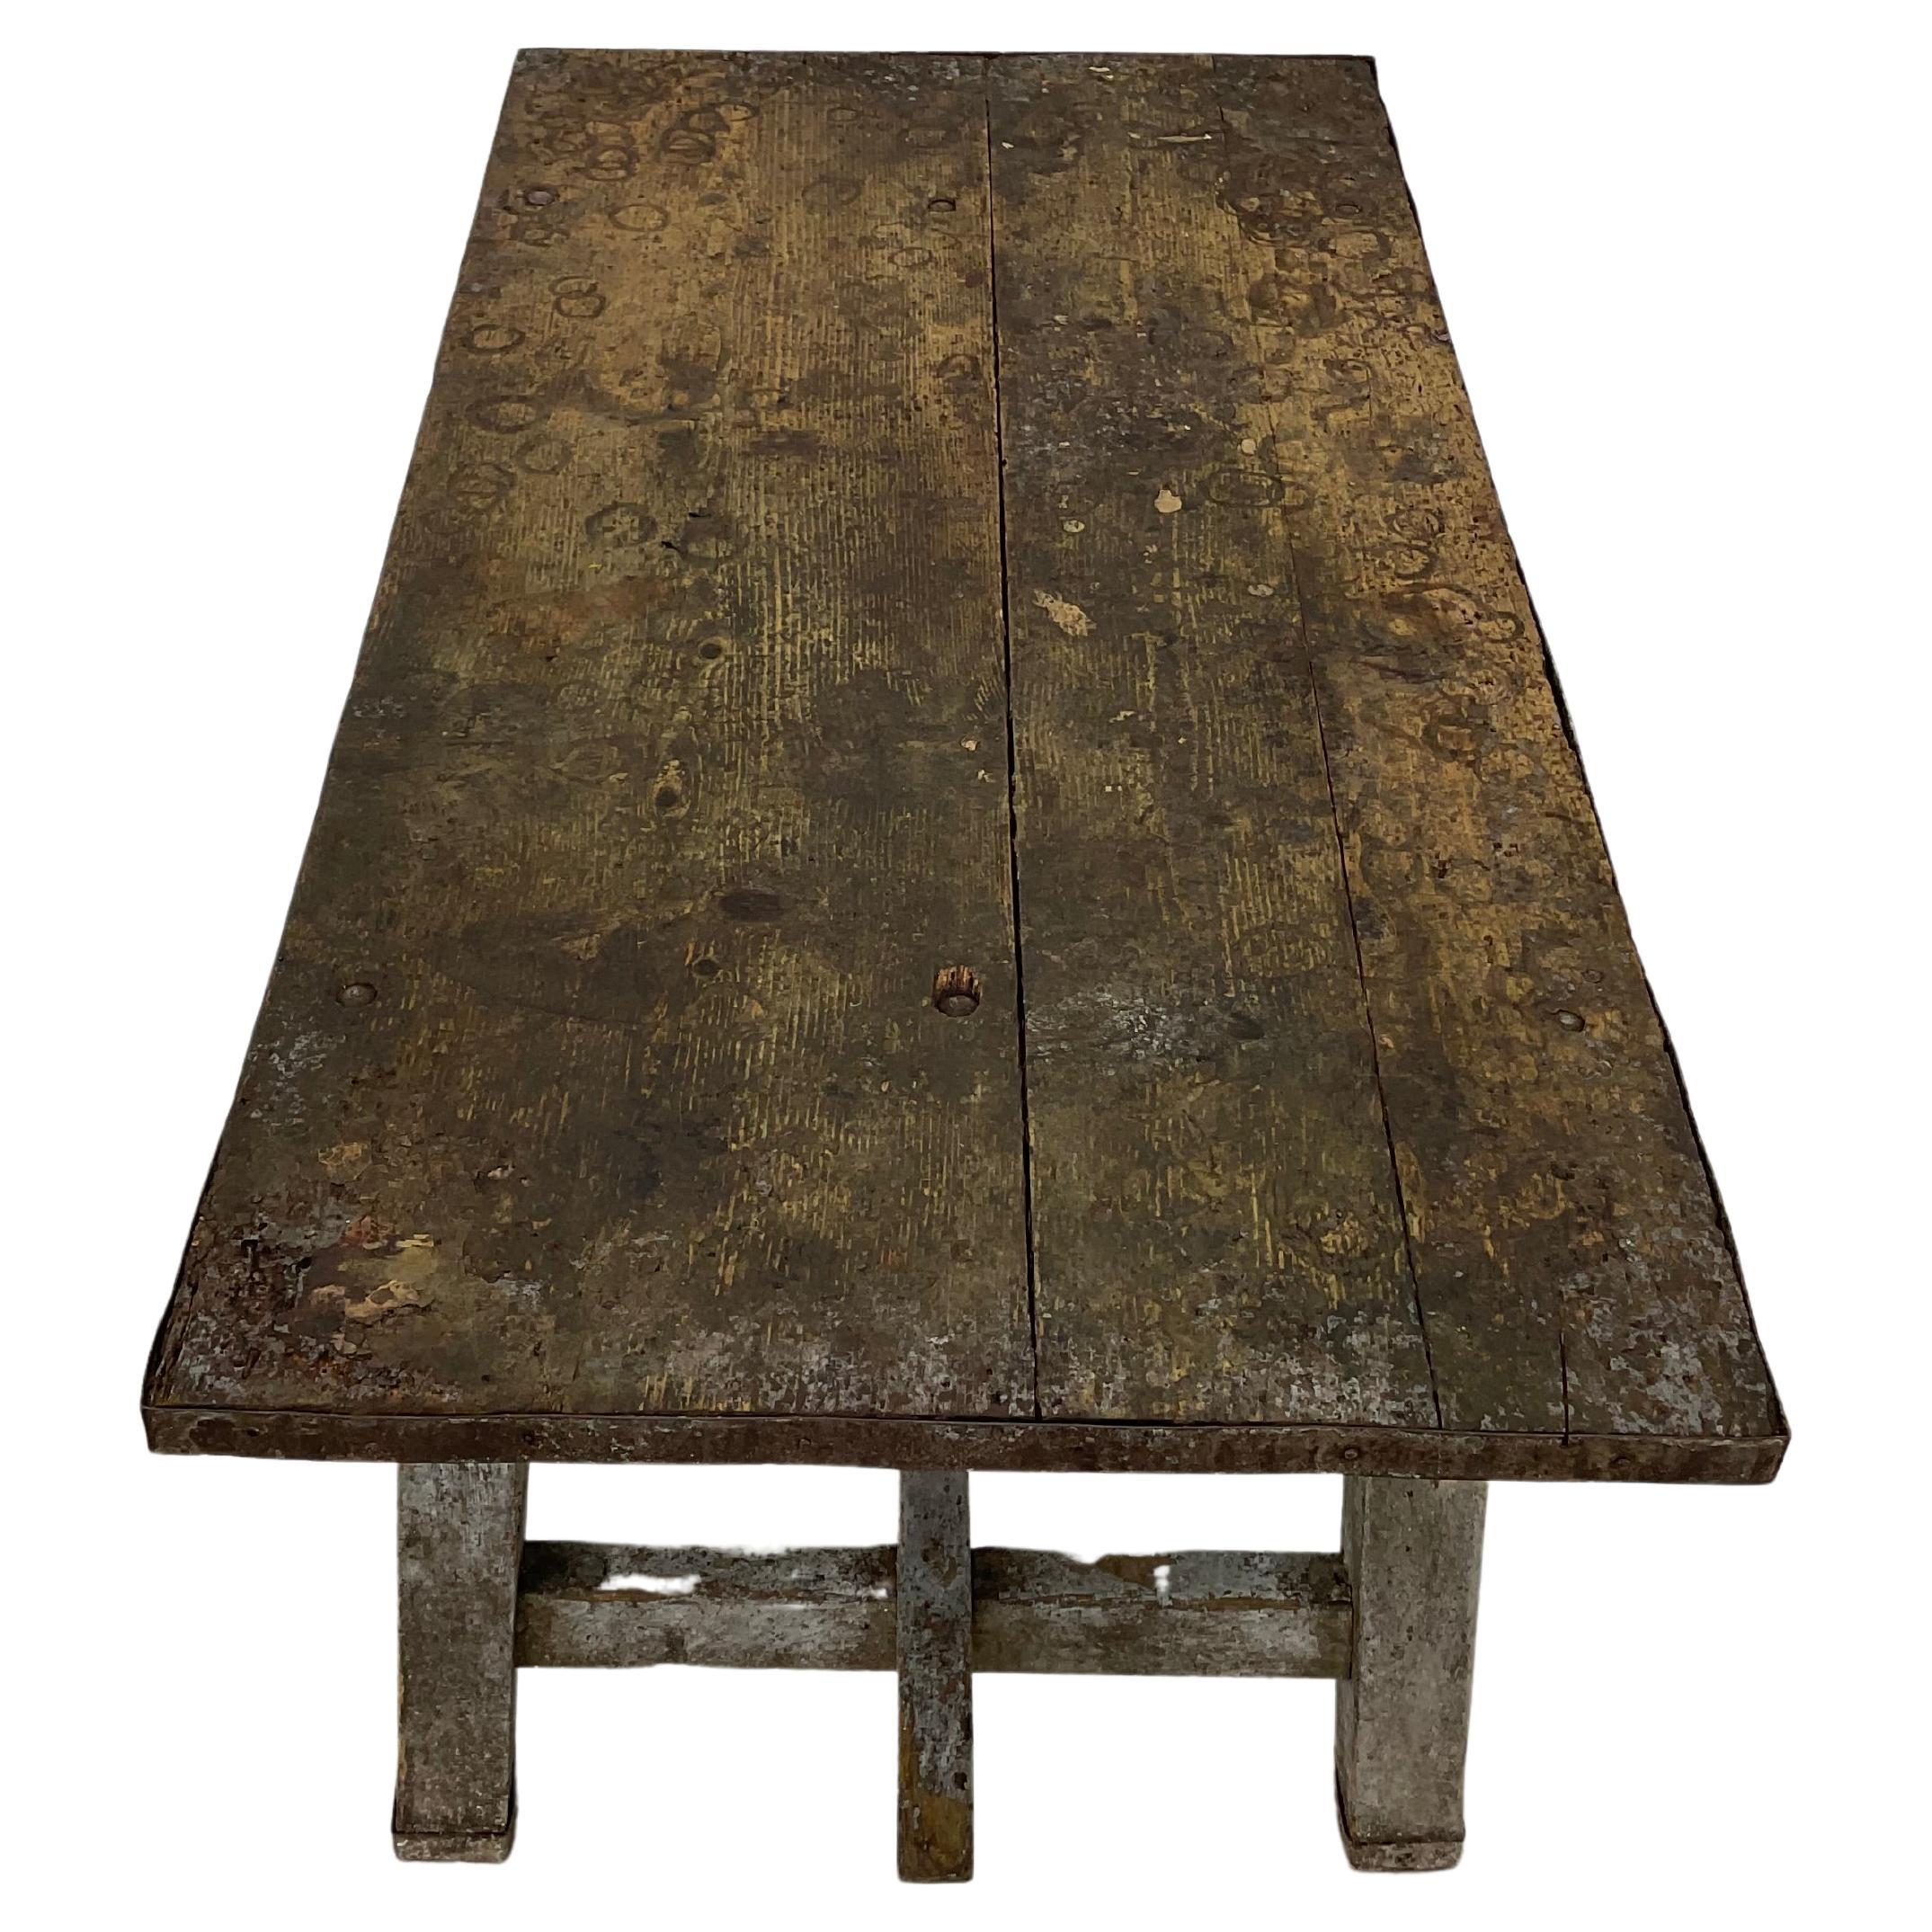 19th century French industrial, rustic writing table or desk. Soundly constructed, all wood top with iron strap around entire edge and bottoms of legs. Trestle base.  Multi purpose table can be used in any room as a dining table, center table or a